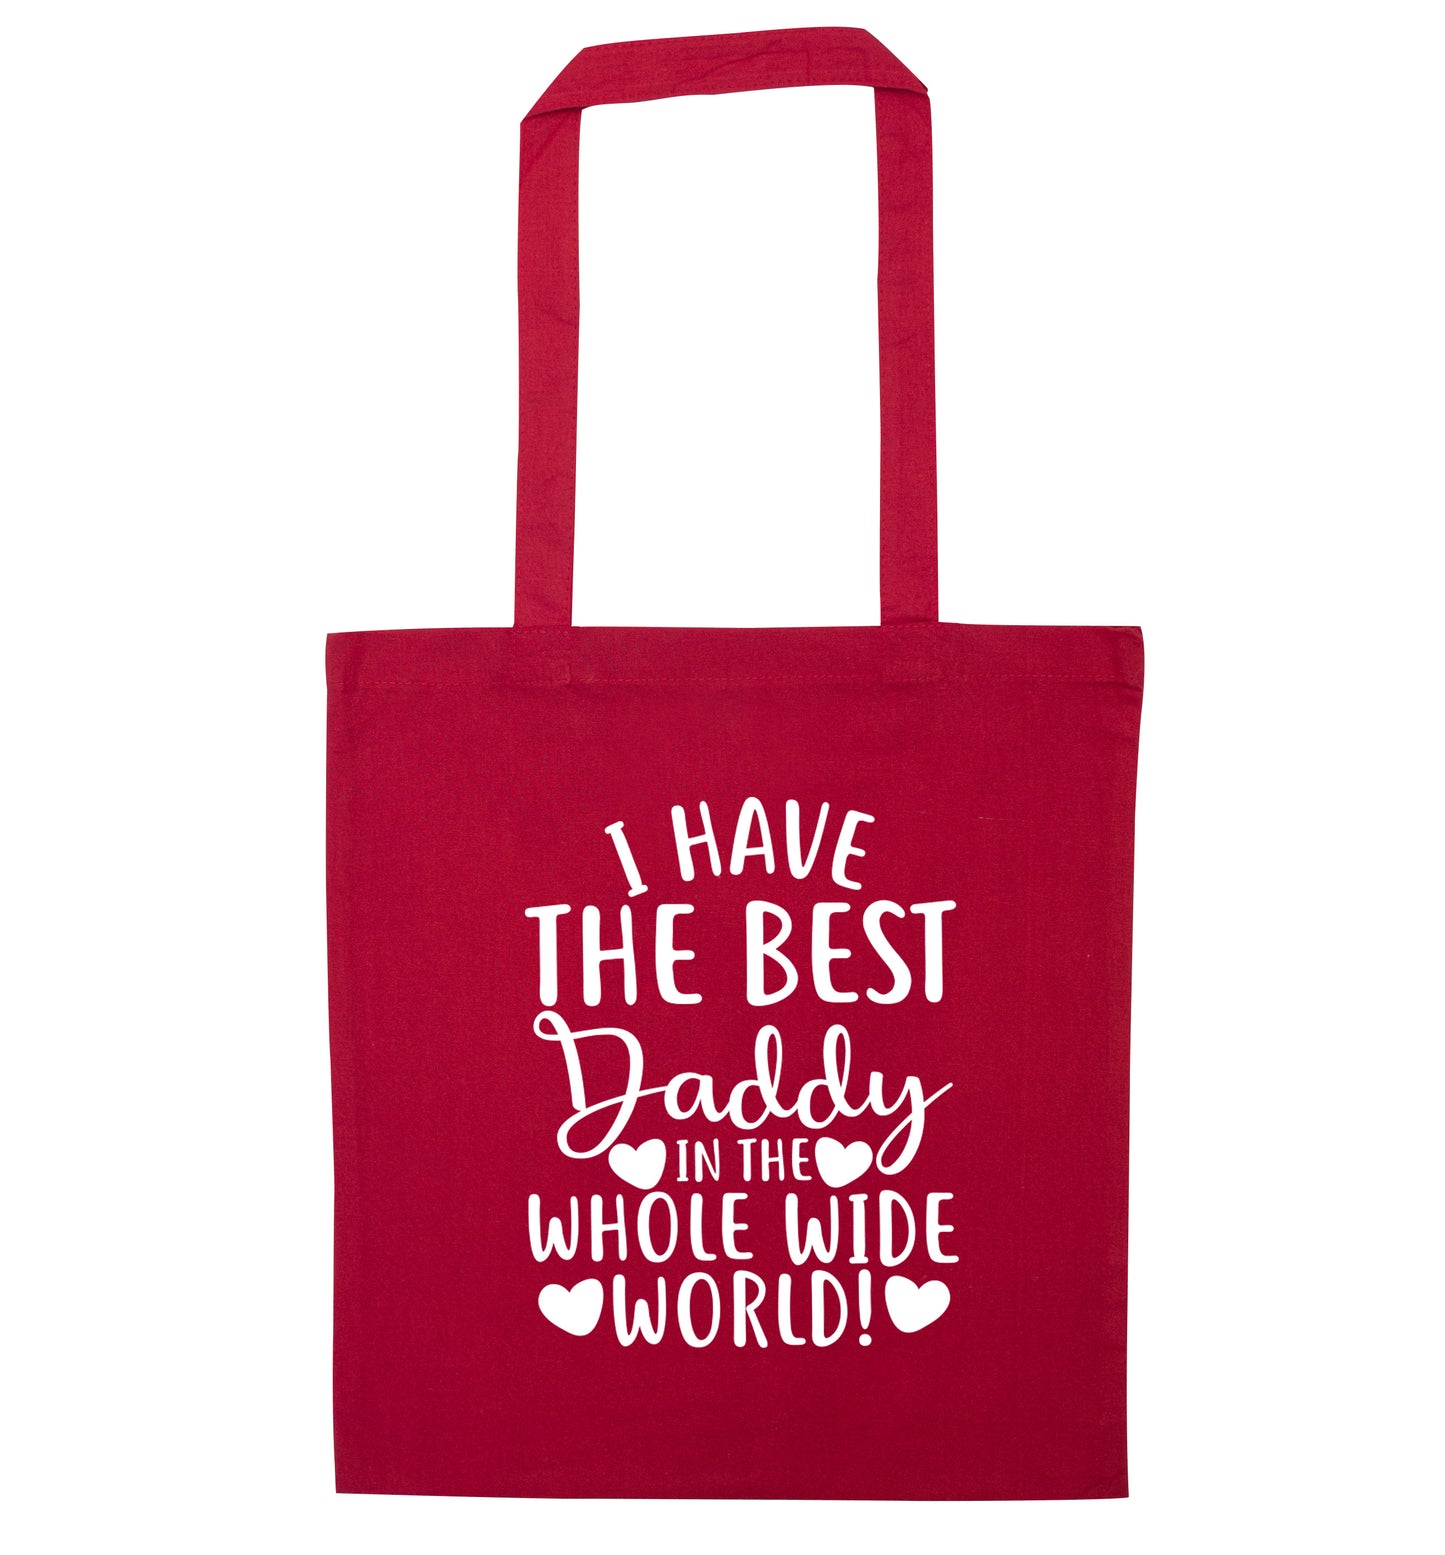 I have the best daddy in the whole wide world red tote bag